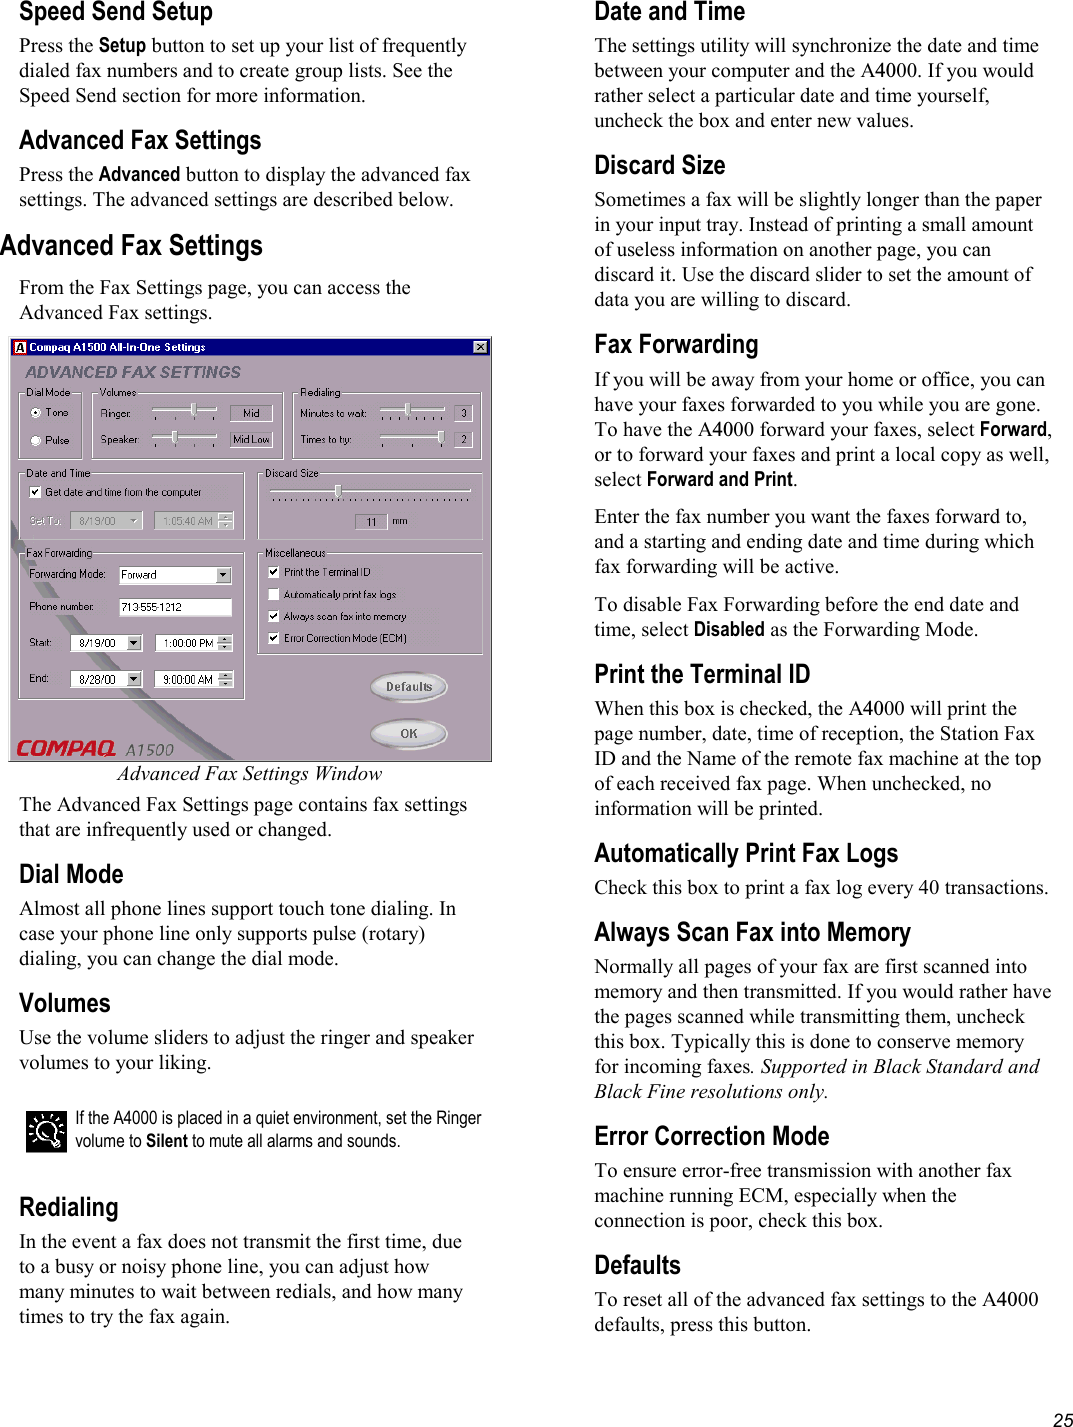   25 Speed Send Setup Press the Setup button to set up your list of frequently dialed fax numbers and to create group lists. See the Speed Send section for more information. Advanced Fax Settings Press the Advanced button to display the advanced fax settings. The advanced settings are described below. Advanced Fax Settings From the Fax Settings page, you can access the Advanced Fax settings.  Advanced Fax Settings Window The Advanced Fax Settings page contains fax settings that are infrequently used or changed. Dial Mode Almost all phone lines support touch tone dialing. In case your phone line only supports pulse (rotary) dialing, you can change the dial mode. Volumes Use the volume sliders to adjust the ringer and speaker volumes to your liking.   If the A4000 is placed in a quiet environment, set the Ringer volume to Silent to mute all alarms and sounds.  Redialing In the event a fax does not transmit the first time, due to a busy or noisy phone line, you can adjust how many minutes to wait between redials, and how many times to try the fax again. Date and Time The settings utility will synchronize the date and time between your computer and the A4000. If you would rather select a particular date and time yourself, uncheck the box and enter new values. Discard Size Sometimes a fax will be slightly longer than the paper in your input tray. Instead of printing a small amount of useless information on another page, you can discard it. Use the discard slider to set the amount of data you are willing to discard. Fax Forwarding If you will be away from your home or office, you can have your faxes forwarded to you while you are gone. To have the A4000 forward your faxes, select Forward, or to forward your faxes and print a local copy as well, select Forward and Print. Enter the fax number you want the faxes forward to, and a starting and ending date and time during which fax forwarding will be active. To disable Fax Forwarding before the end date and time, select Disabled as the Forwarding Mode. Print the Terminal ID When this box is checked, the A4000 will print the page number, date, time of reception, the Station Fax ID and the Name of the remote fax machine at the top of each received fax page. When unchecked, no information will be printed. Automatically Print Fax Logs Check this box to print a fax log every 40 transactions. Always Scan Fax into Memory Normally all pages of your fax are first scanned into memory and then transmitted. If you would rather have the pages scanned while transmitting them, uncheck this box. Typically this is done to conserve memory for incoming faxes. Supported in Black Standard and Black Fine resolutions only. Error Correction Mode To ensure error-free transmission with another fax machine running ECM, especially when the connection is poor, check this box. Defaults To reset all of the advanced fax settings to the A4000 defaults, press this button. 